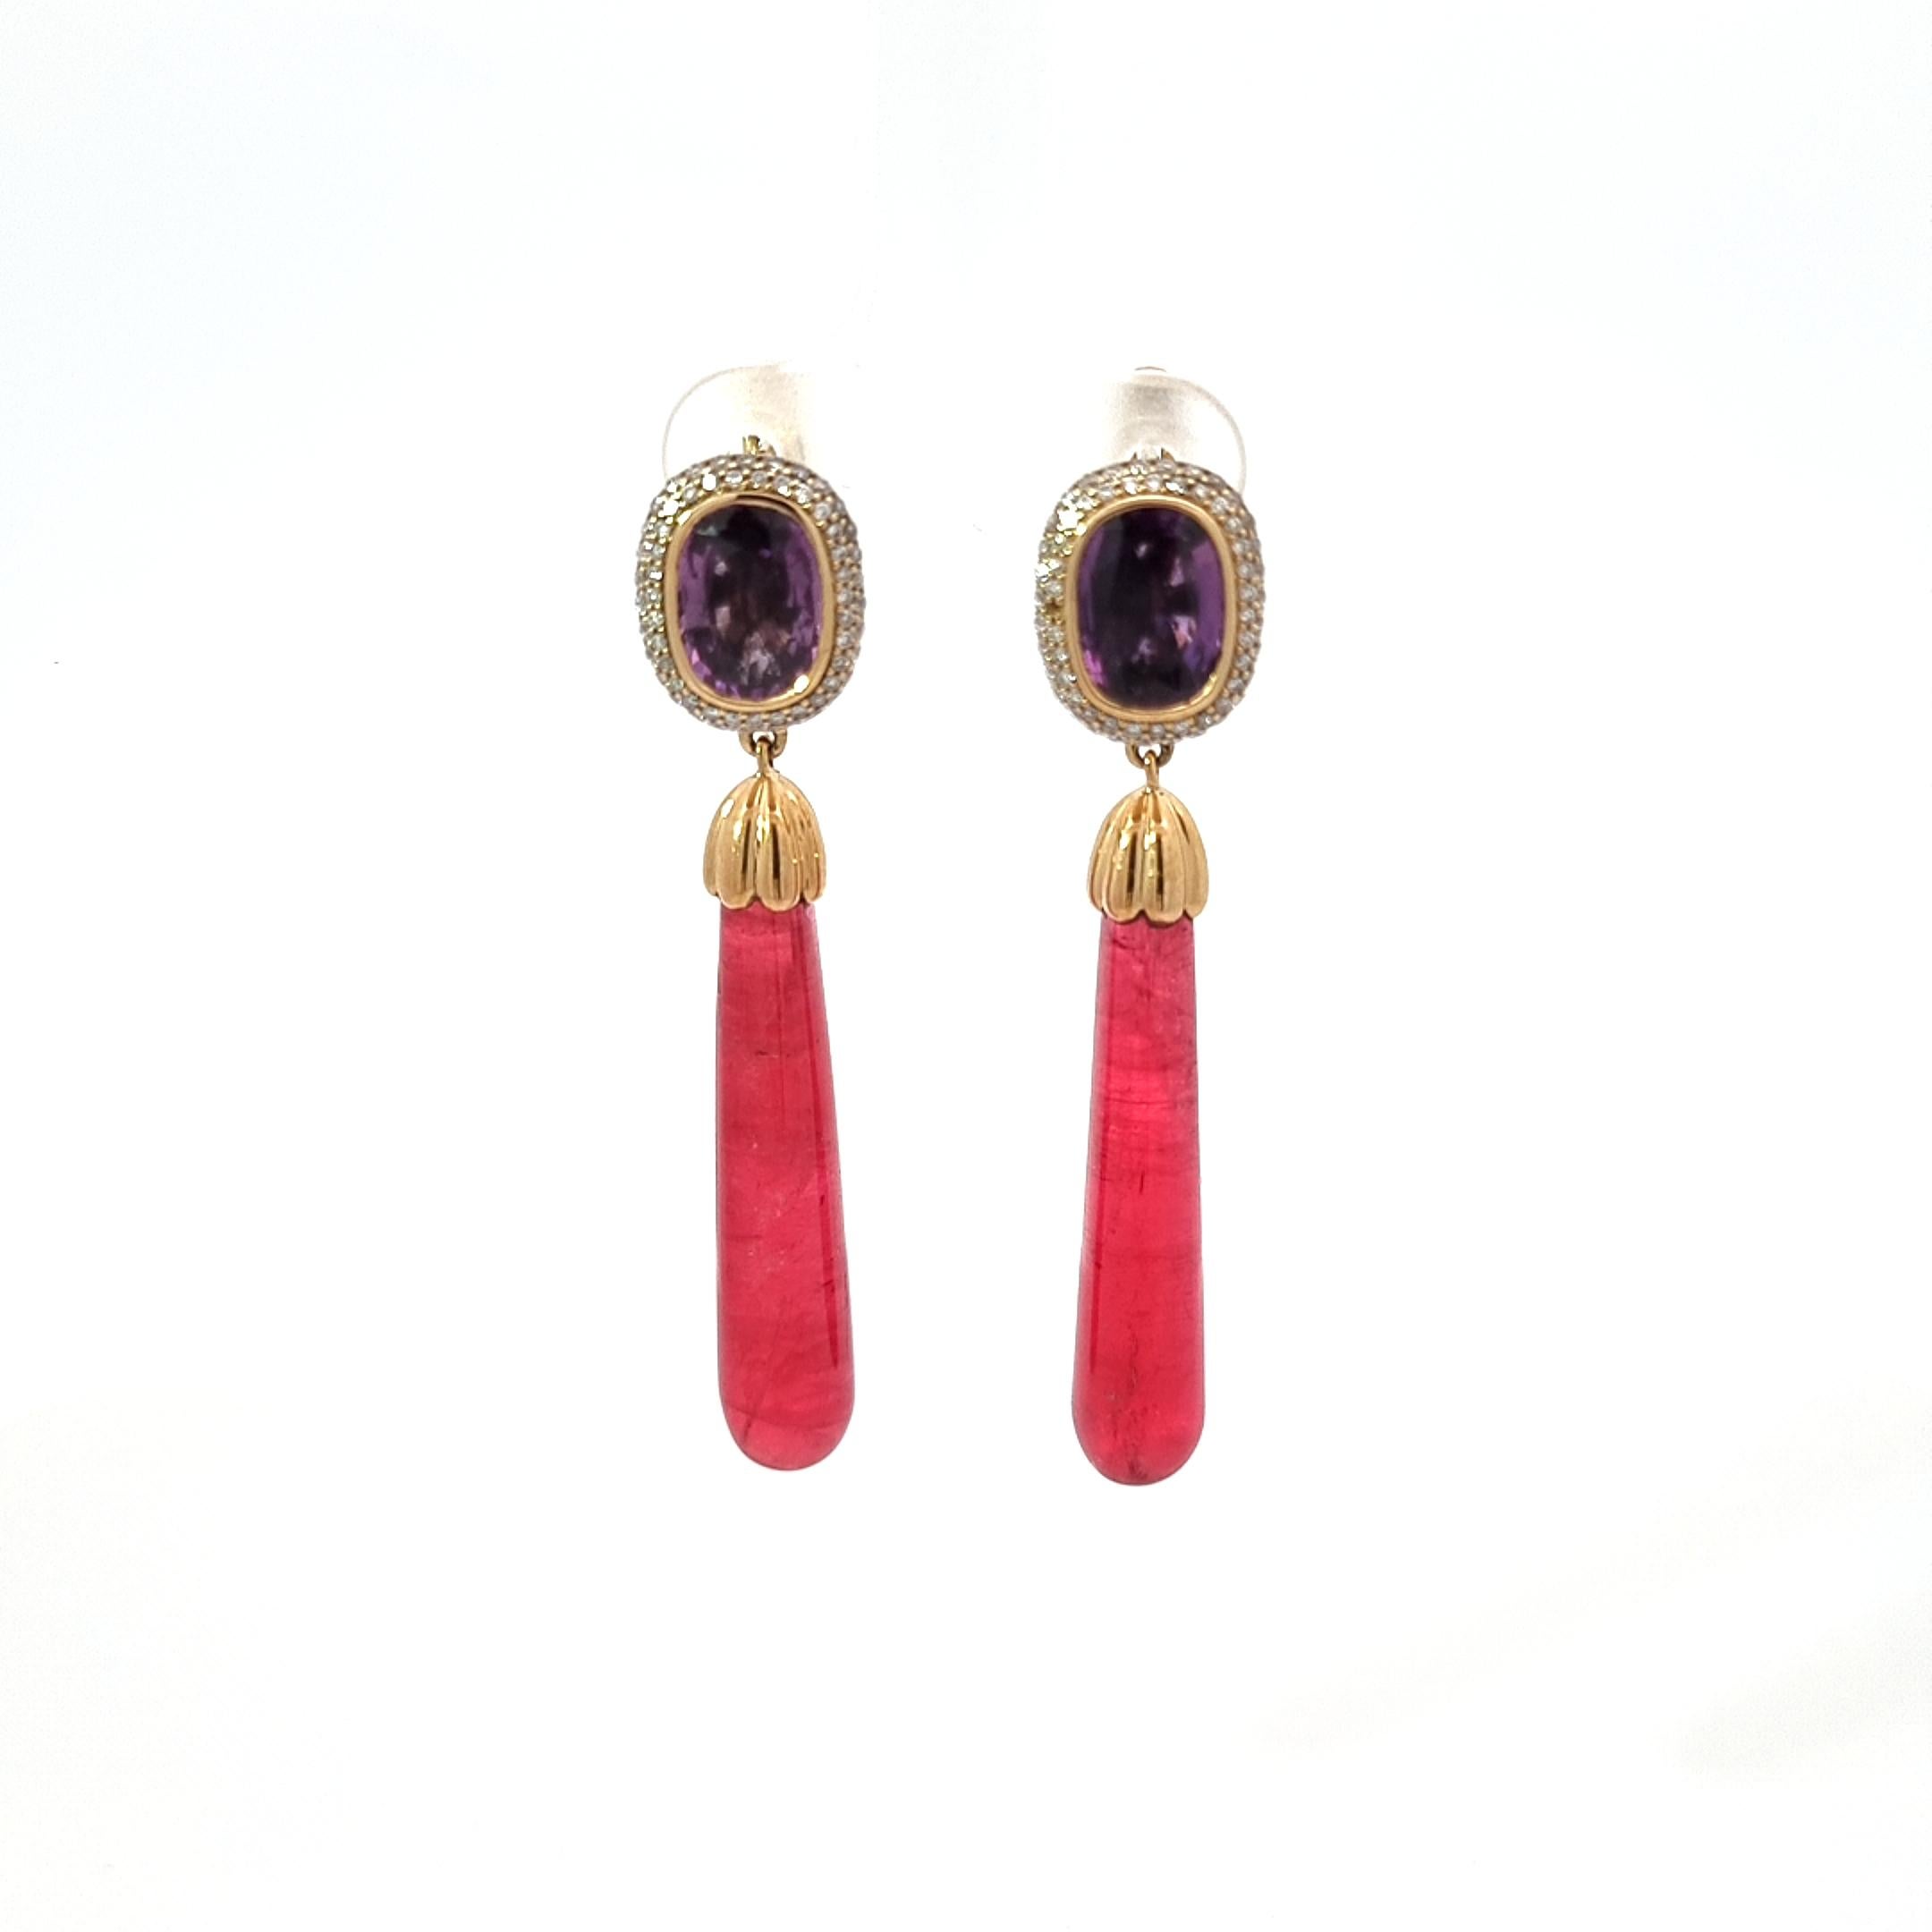 Summer Night Collection by VOTIVE.

Elevate your elegance with VOTIVE's Rhodonite Yellow Gold Drop Earrings from the exquisite Summer Night Collection. Crafted in radiant yellow gold, these earrings exude the warmth and glow of summer evenings. The